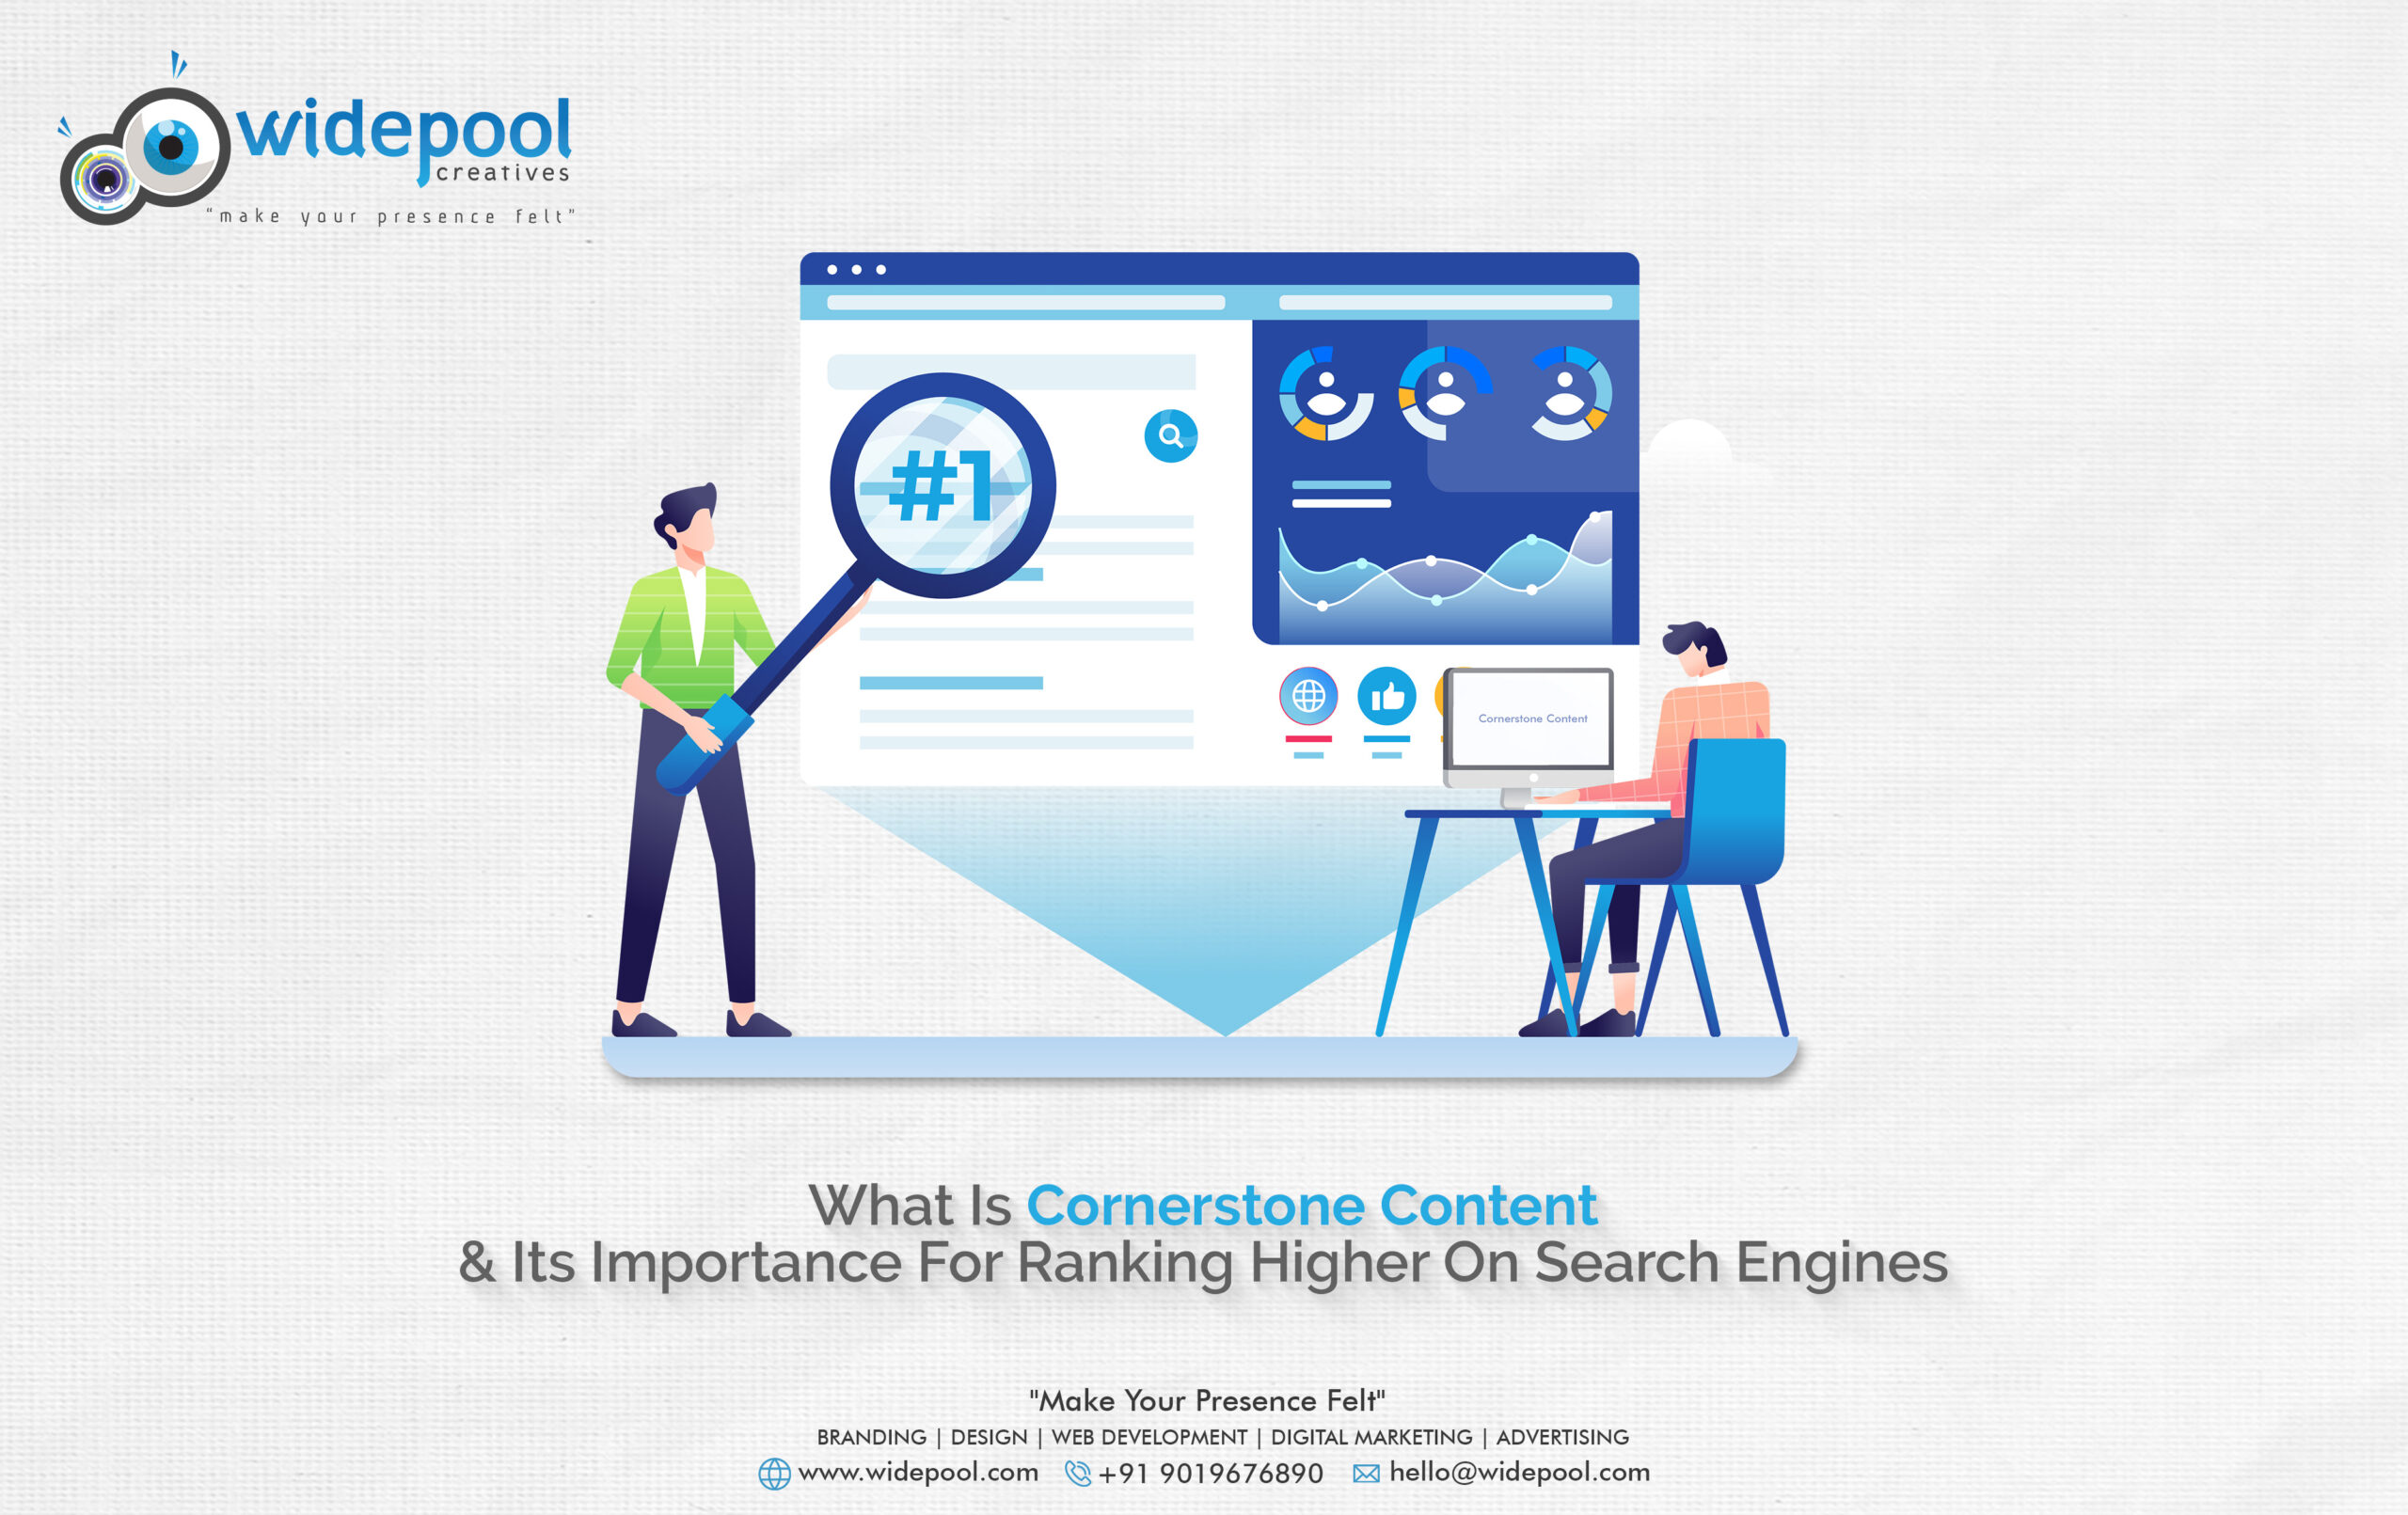 What Is Cornerstone Content & Its Importance For Ranking Higher On Search Engines?